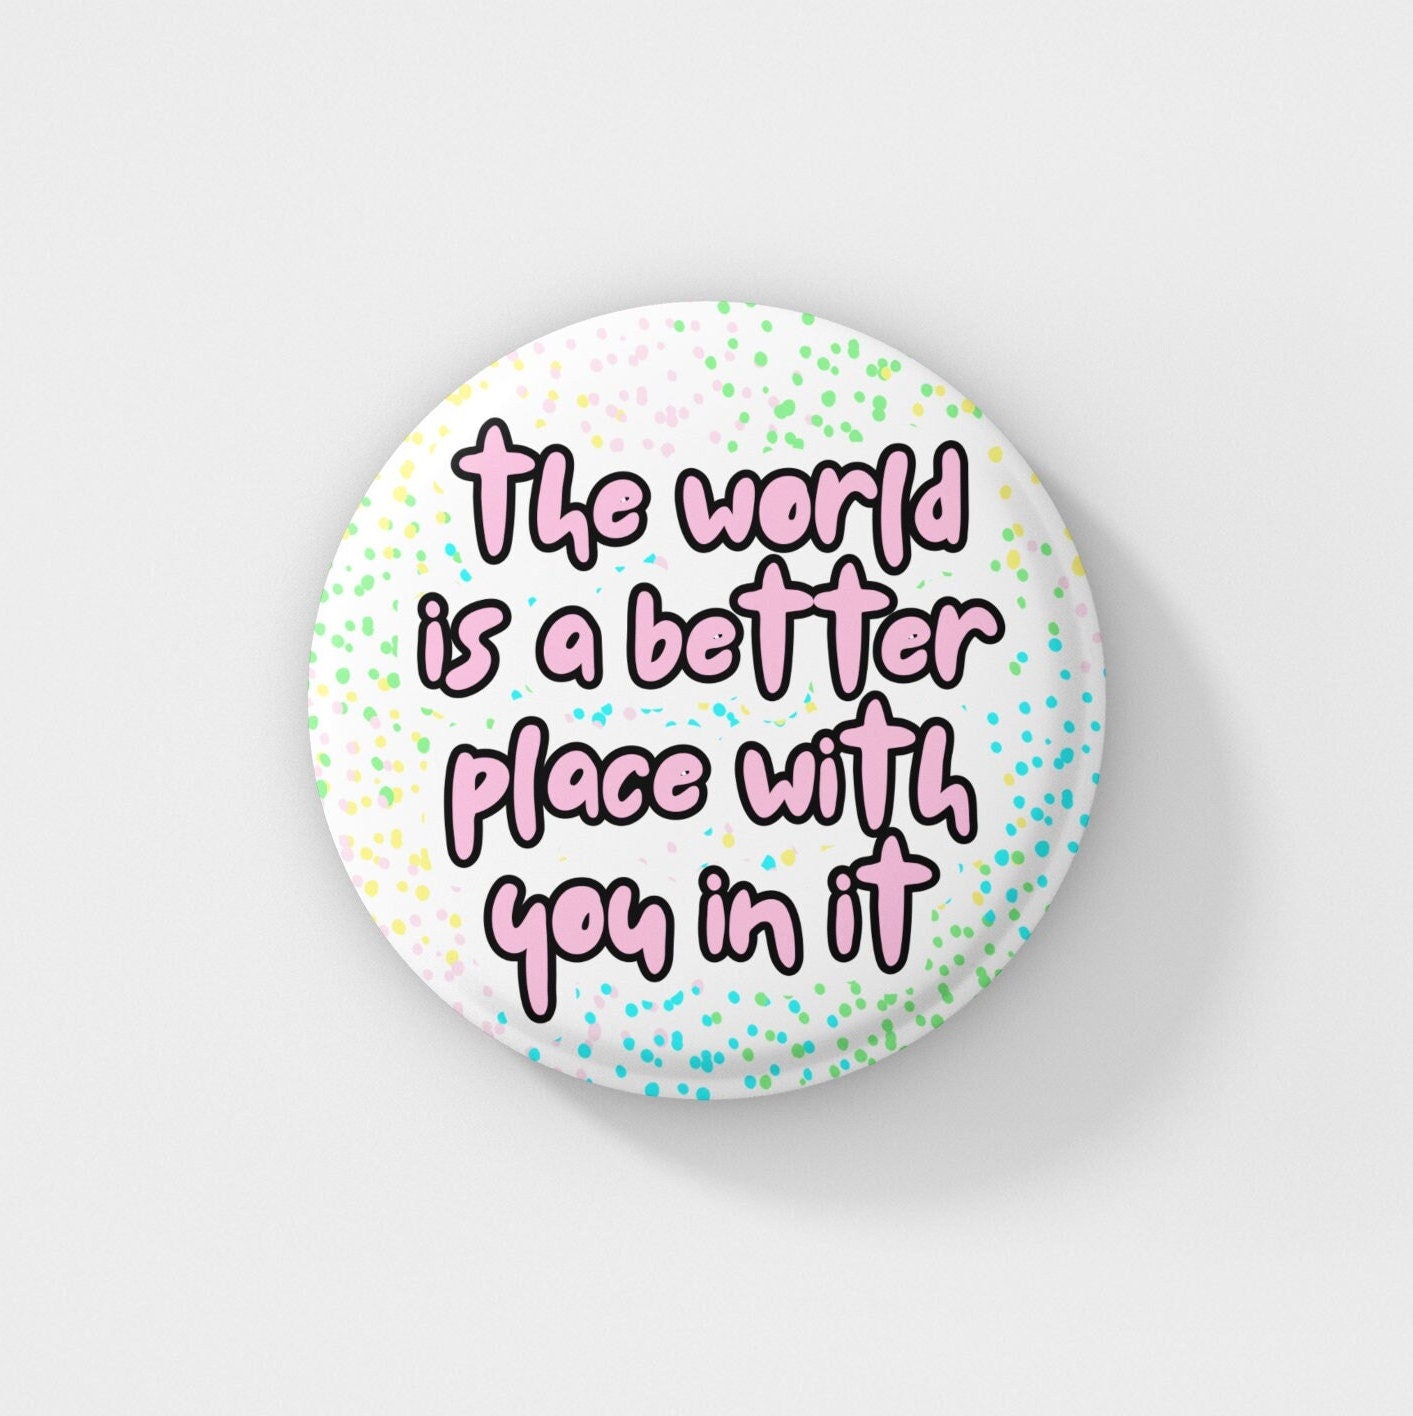 The World Is A Better Place With You In It - Badge Pin | Motivational Pin, Miss You Gift